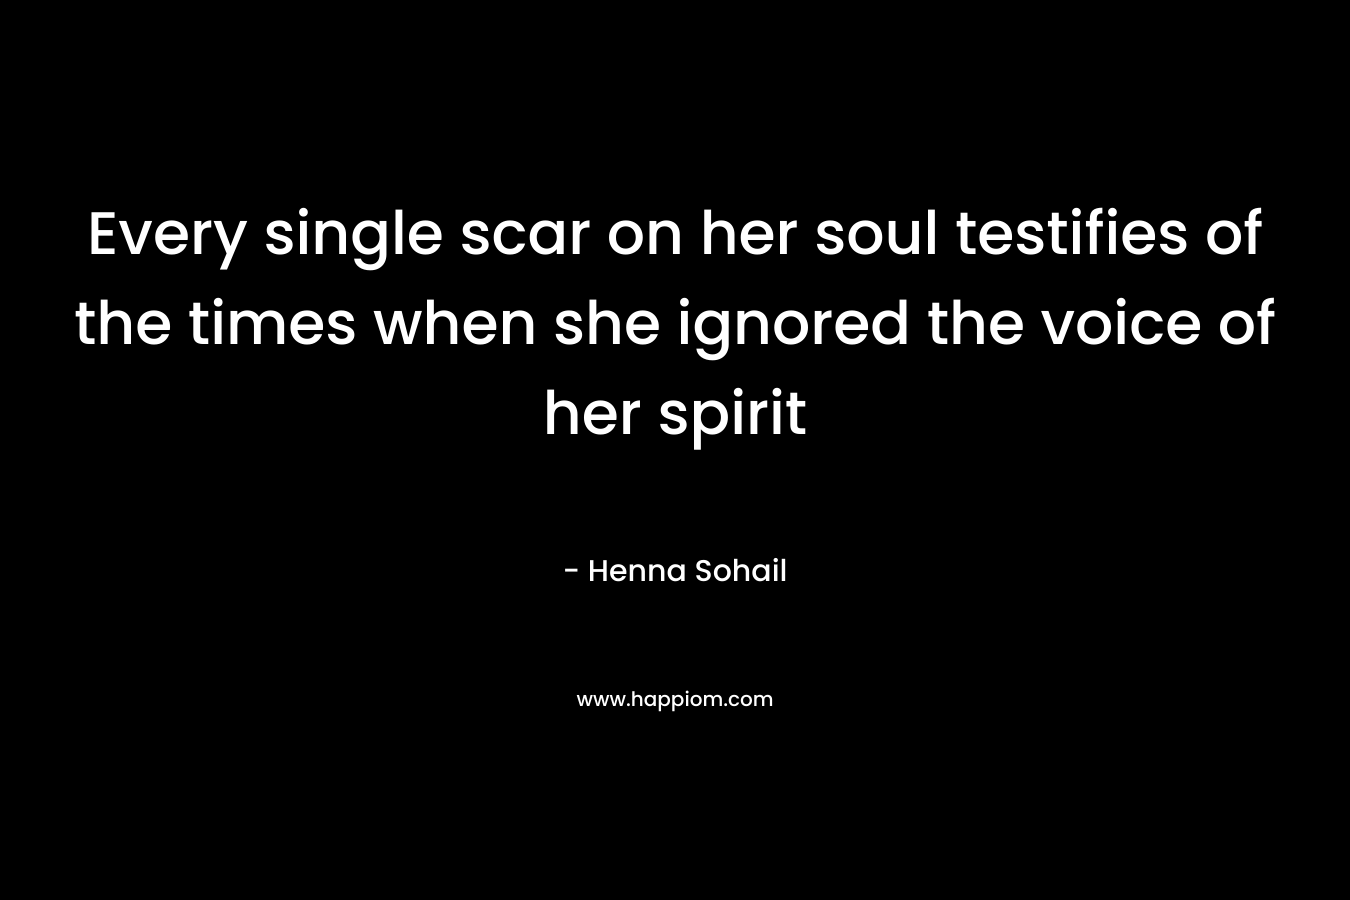 Every single scar on her soul testifies of the times when she ignored the voice of her spirit